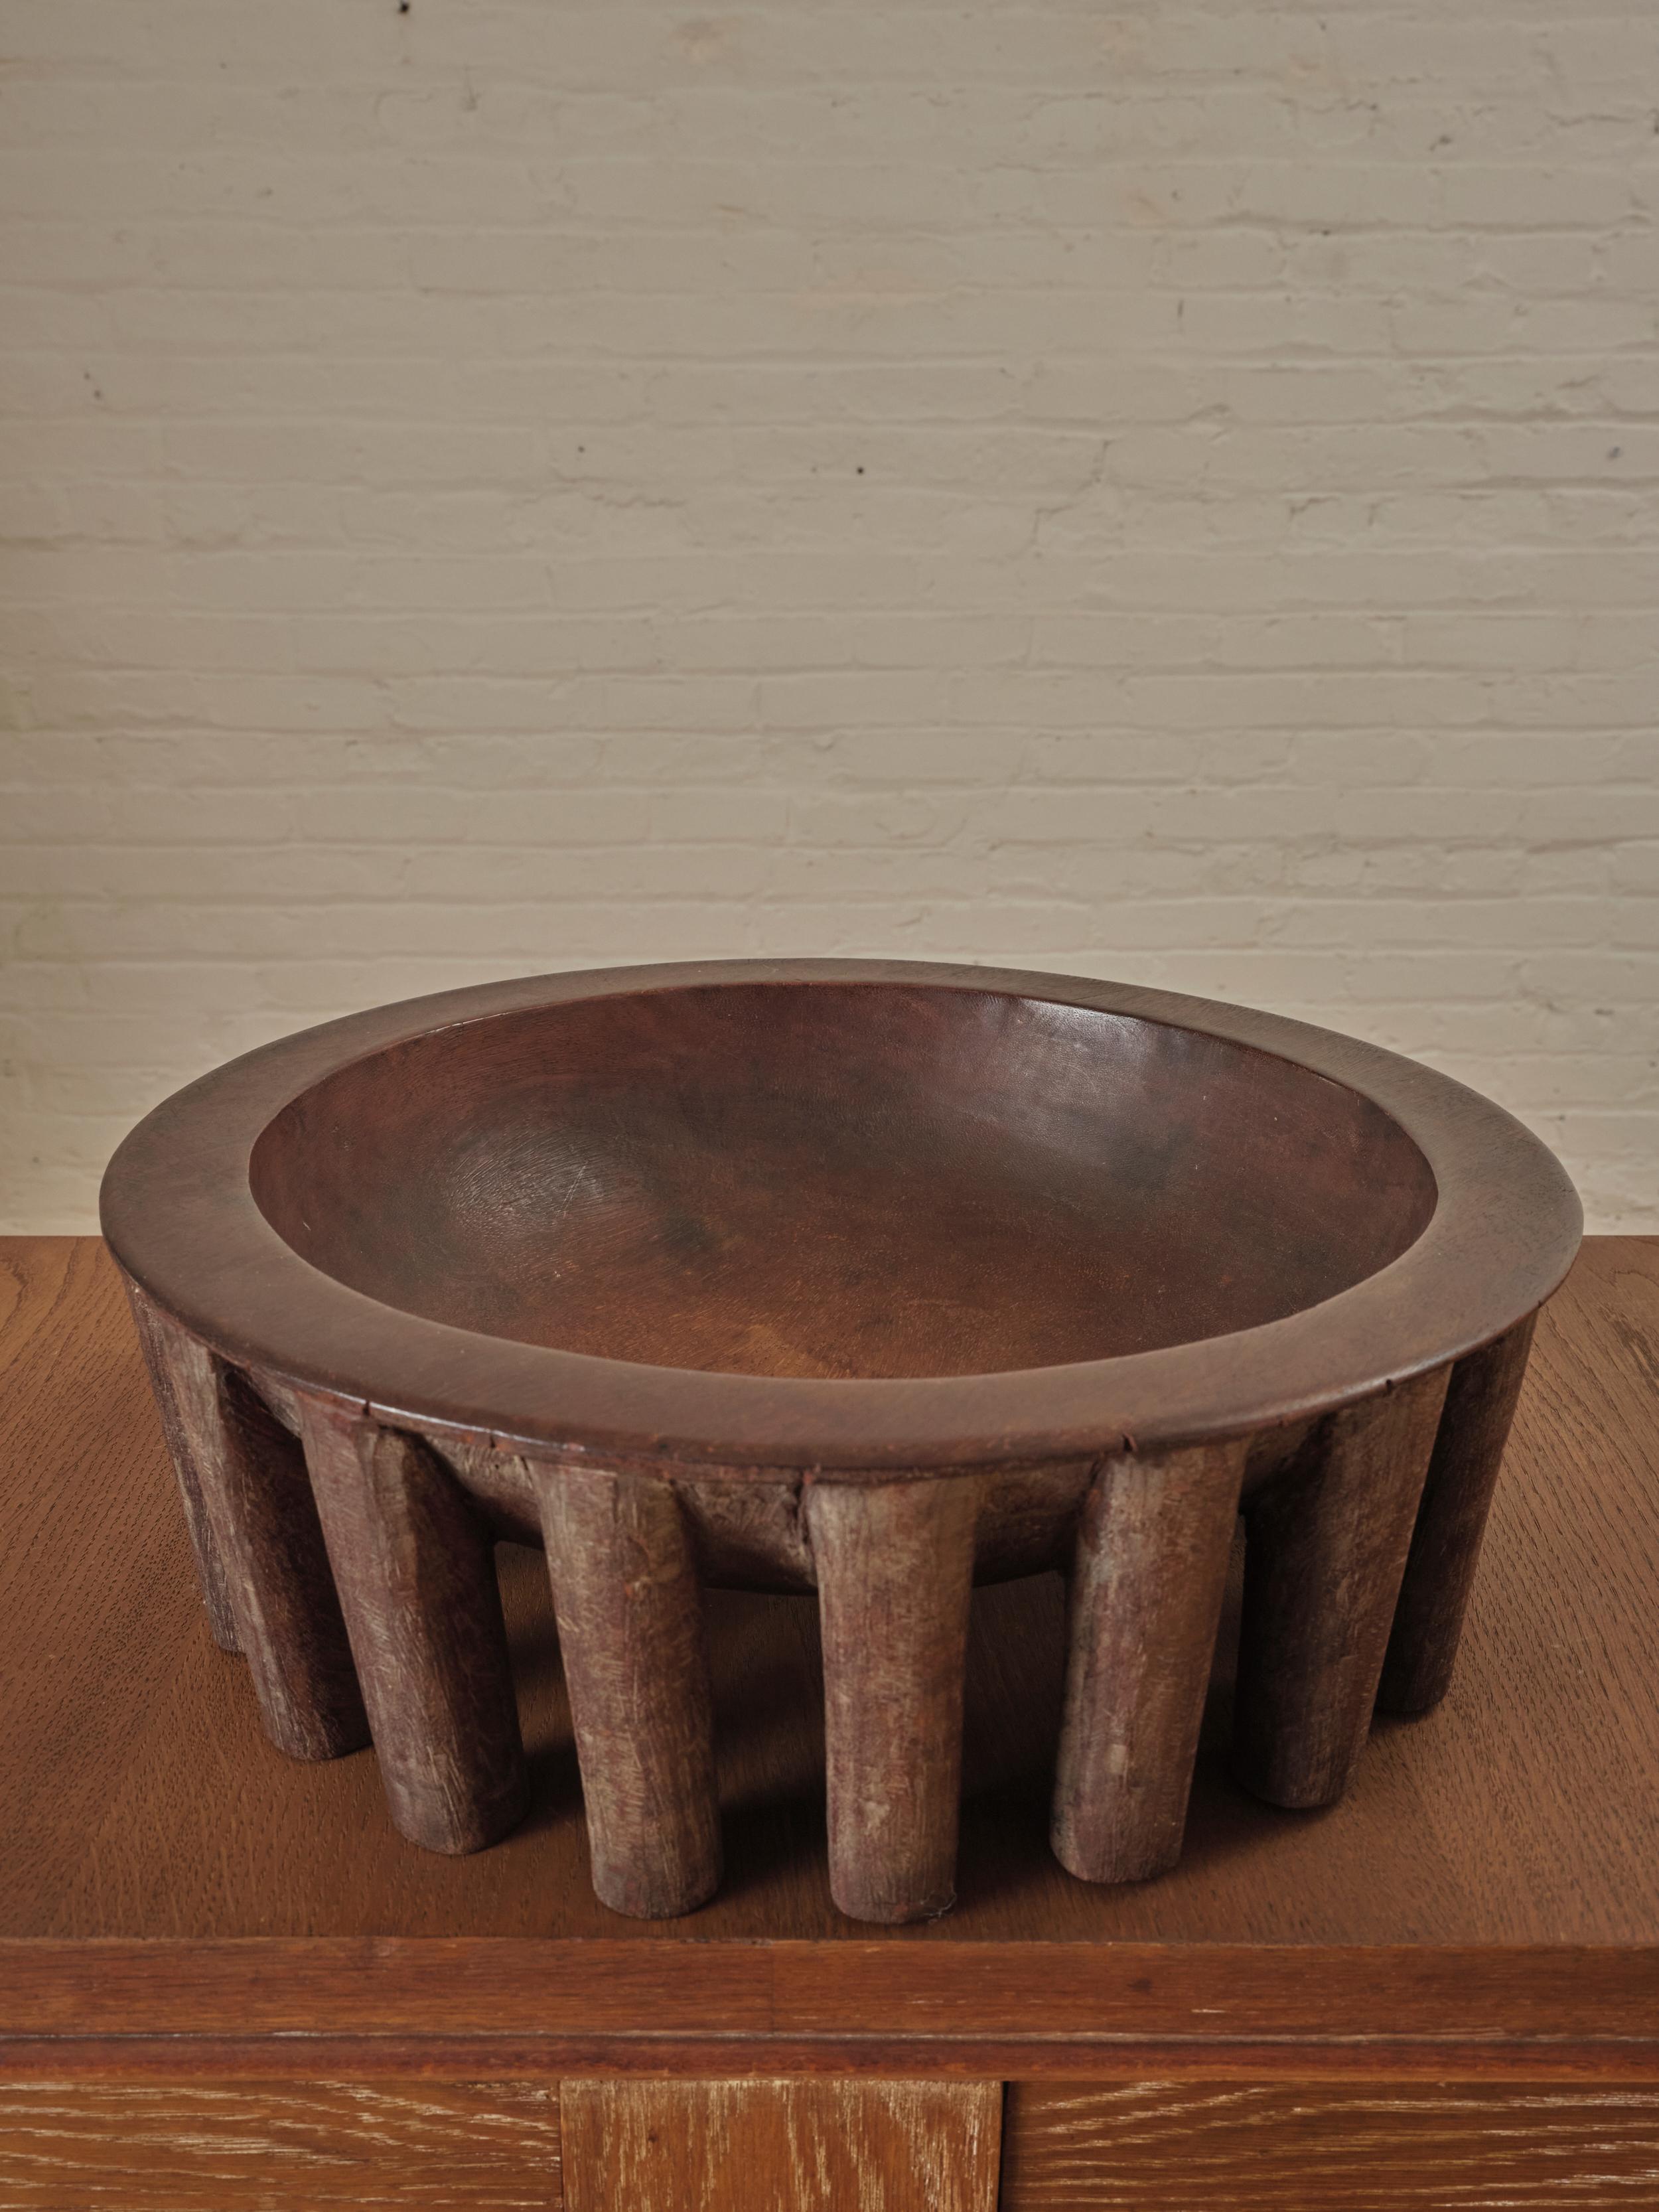 A Samoan Kava Bowl carved from a single piece of hardwood, such as the native Samoan 